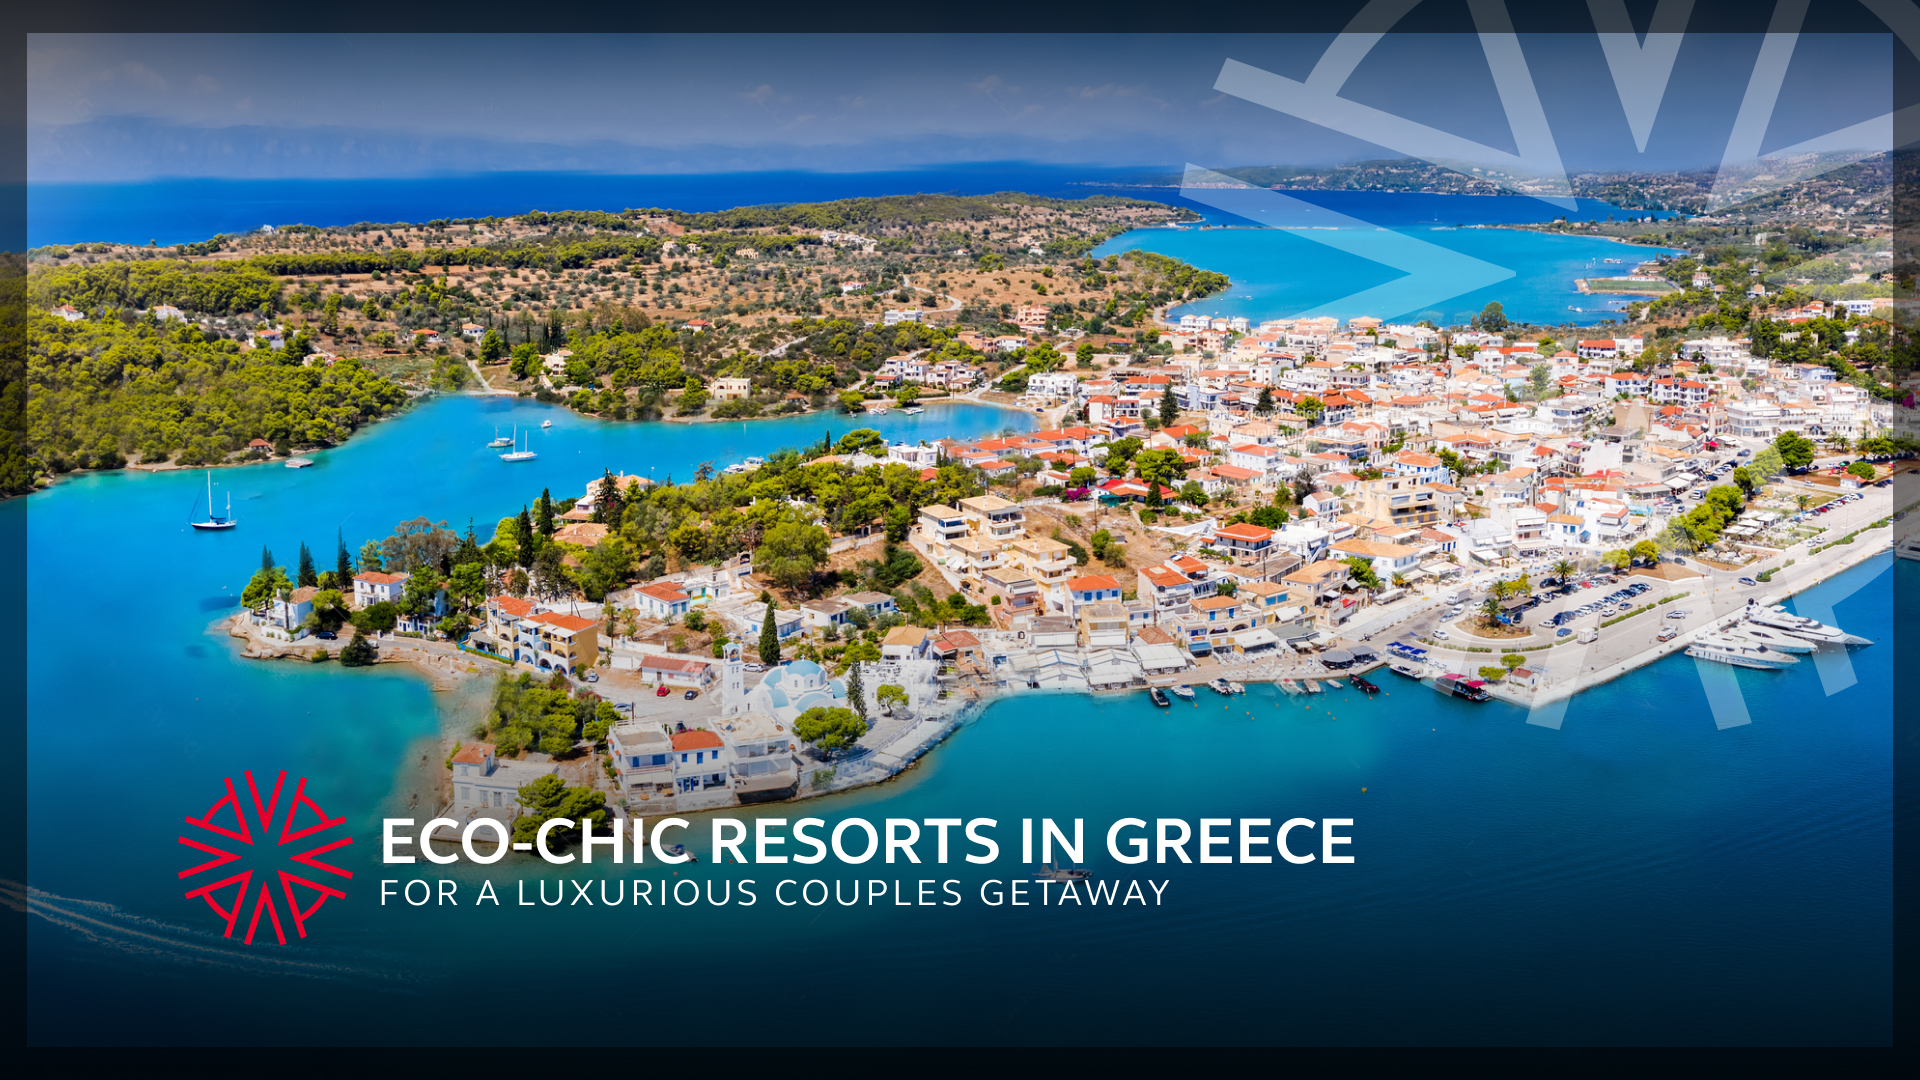 The Peloponnese peninsula of Greece with an exclusive Greek resort for a luxurious couples getaway